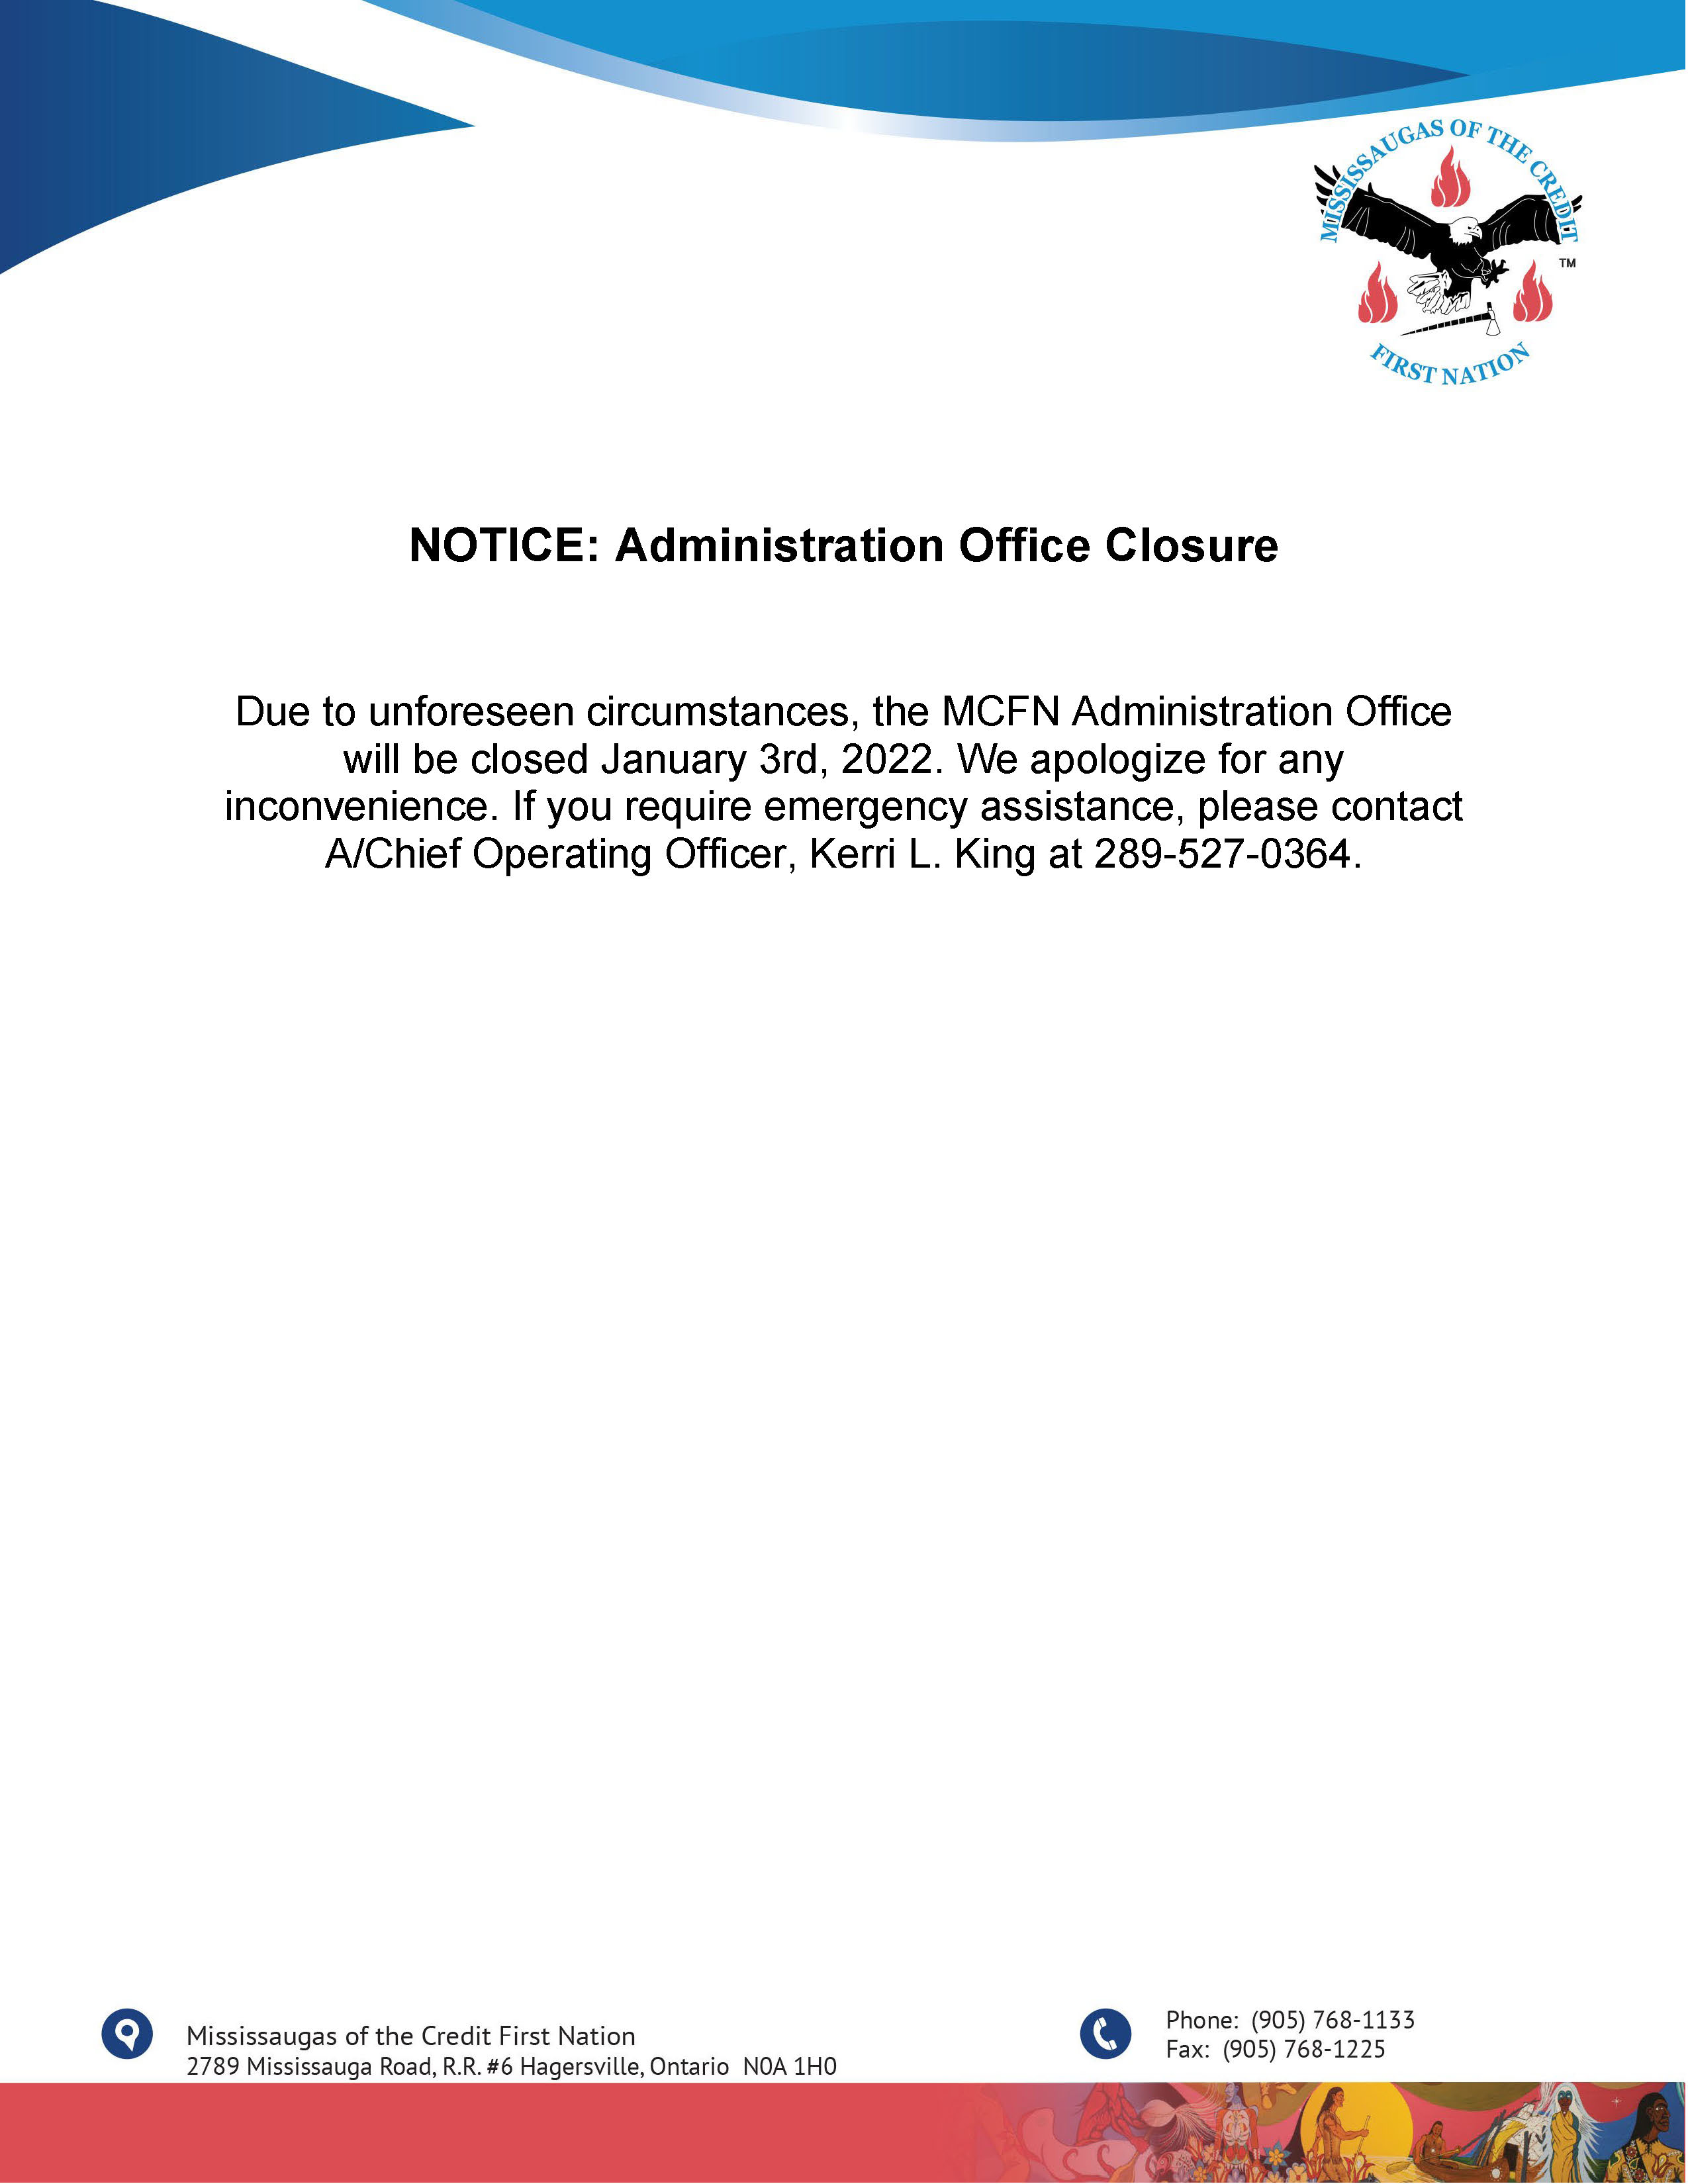 NOTICE: Administration Office Closure